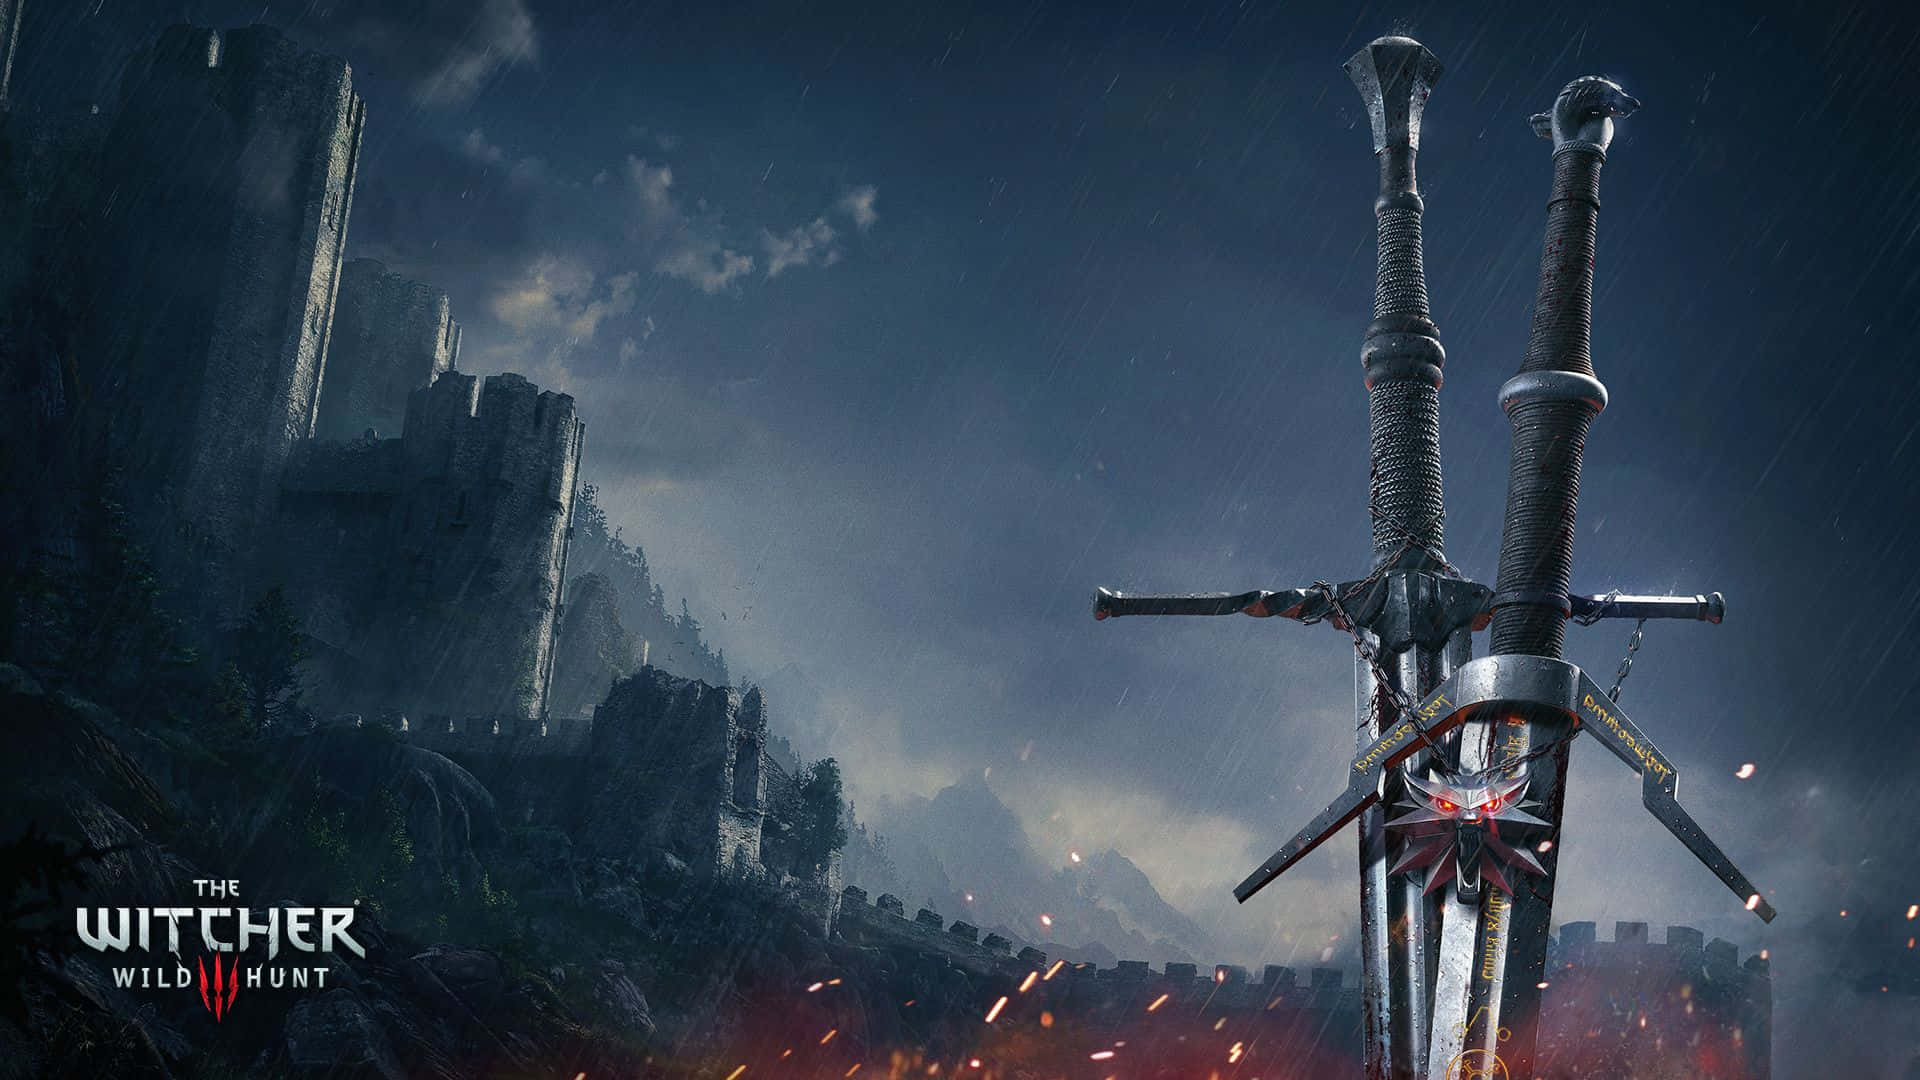 Experience the epic fantasy of The Witcher 3: Wild Hunt